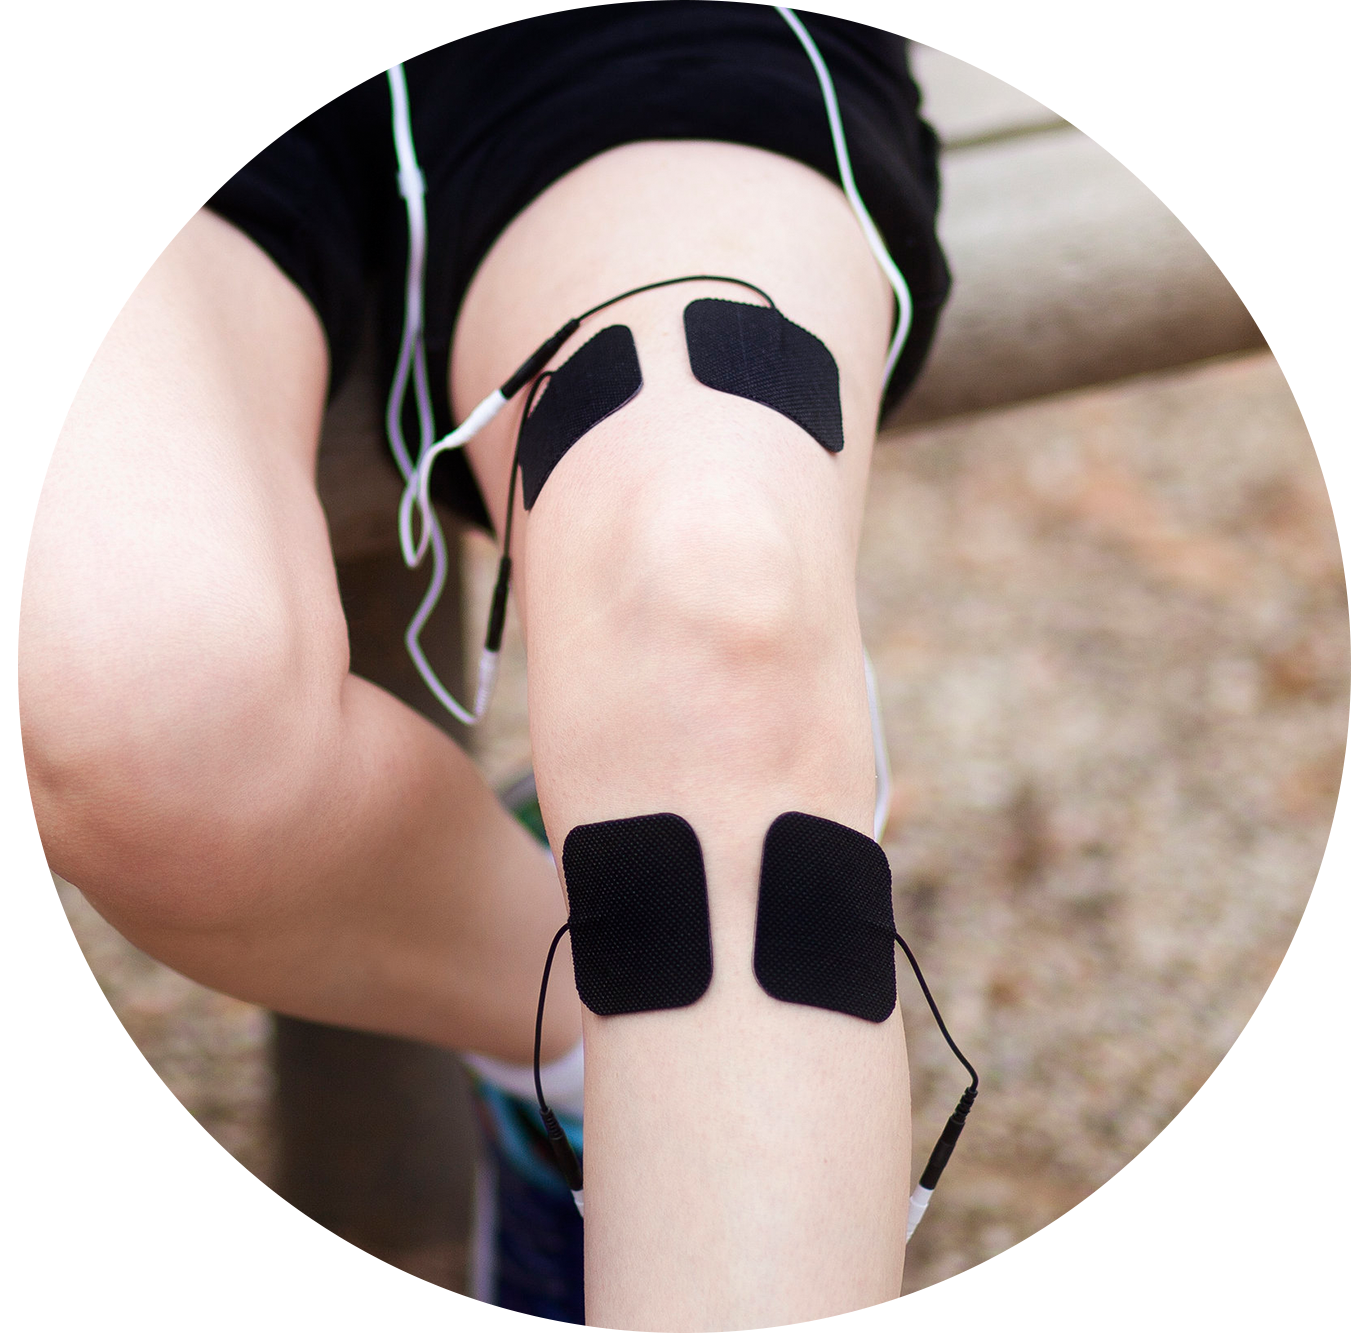 Can You Use a TENS Unit for IT Band Pain? - iReliev